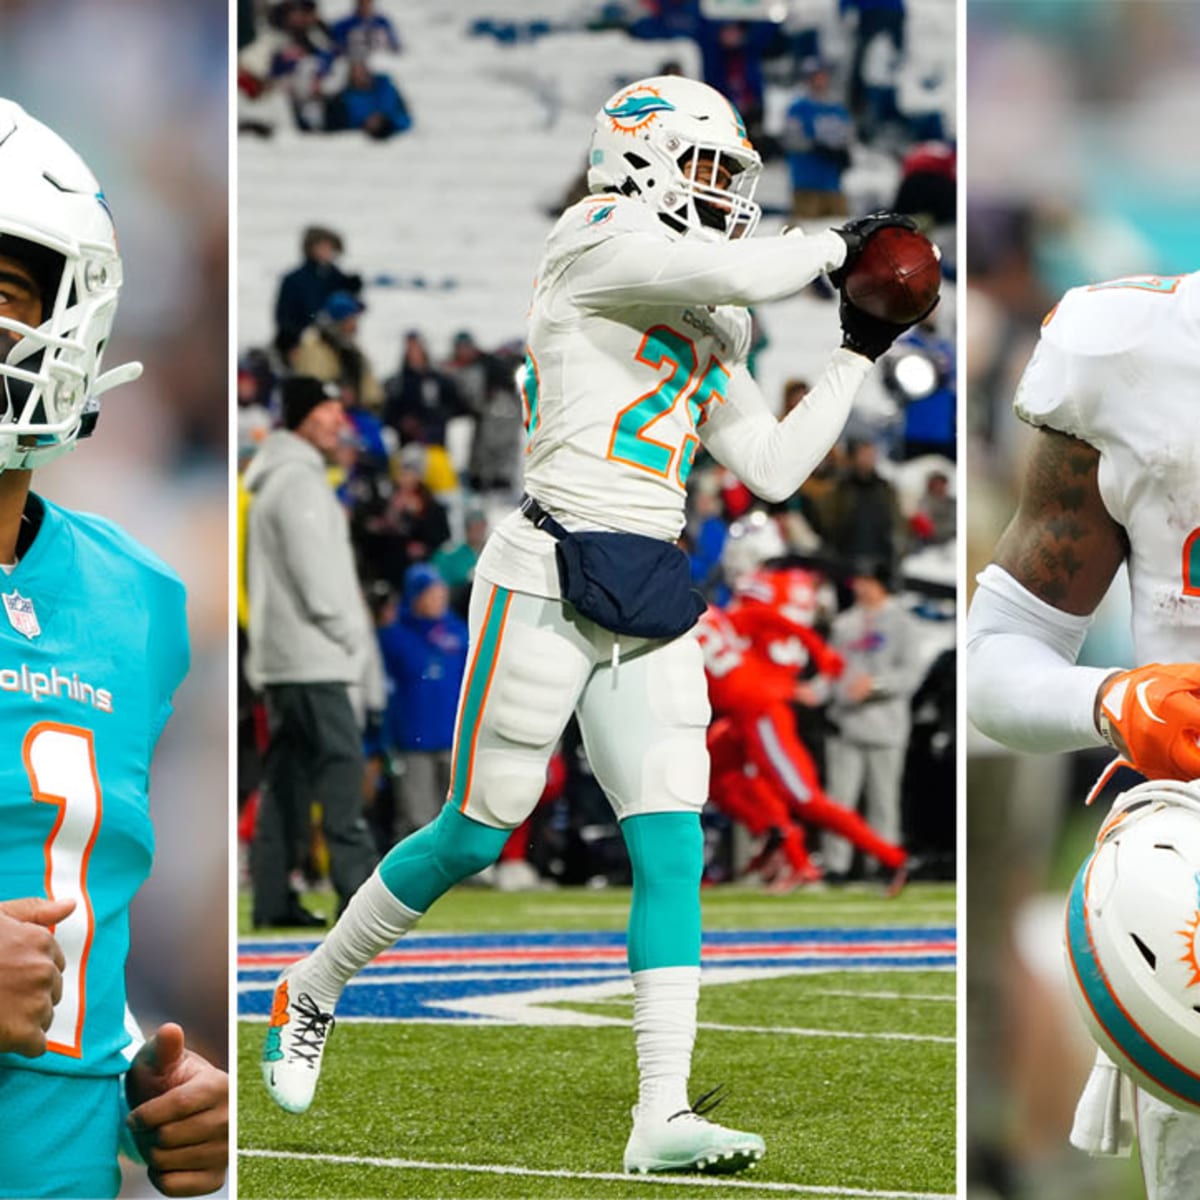 2023 NFL preview: Dolphins will go as far as Tua takes them